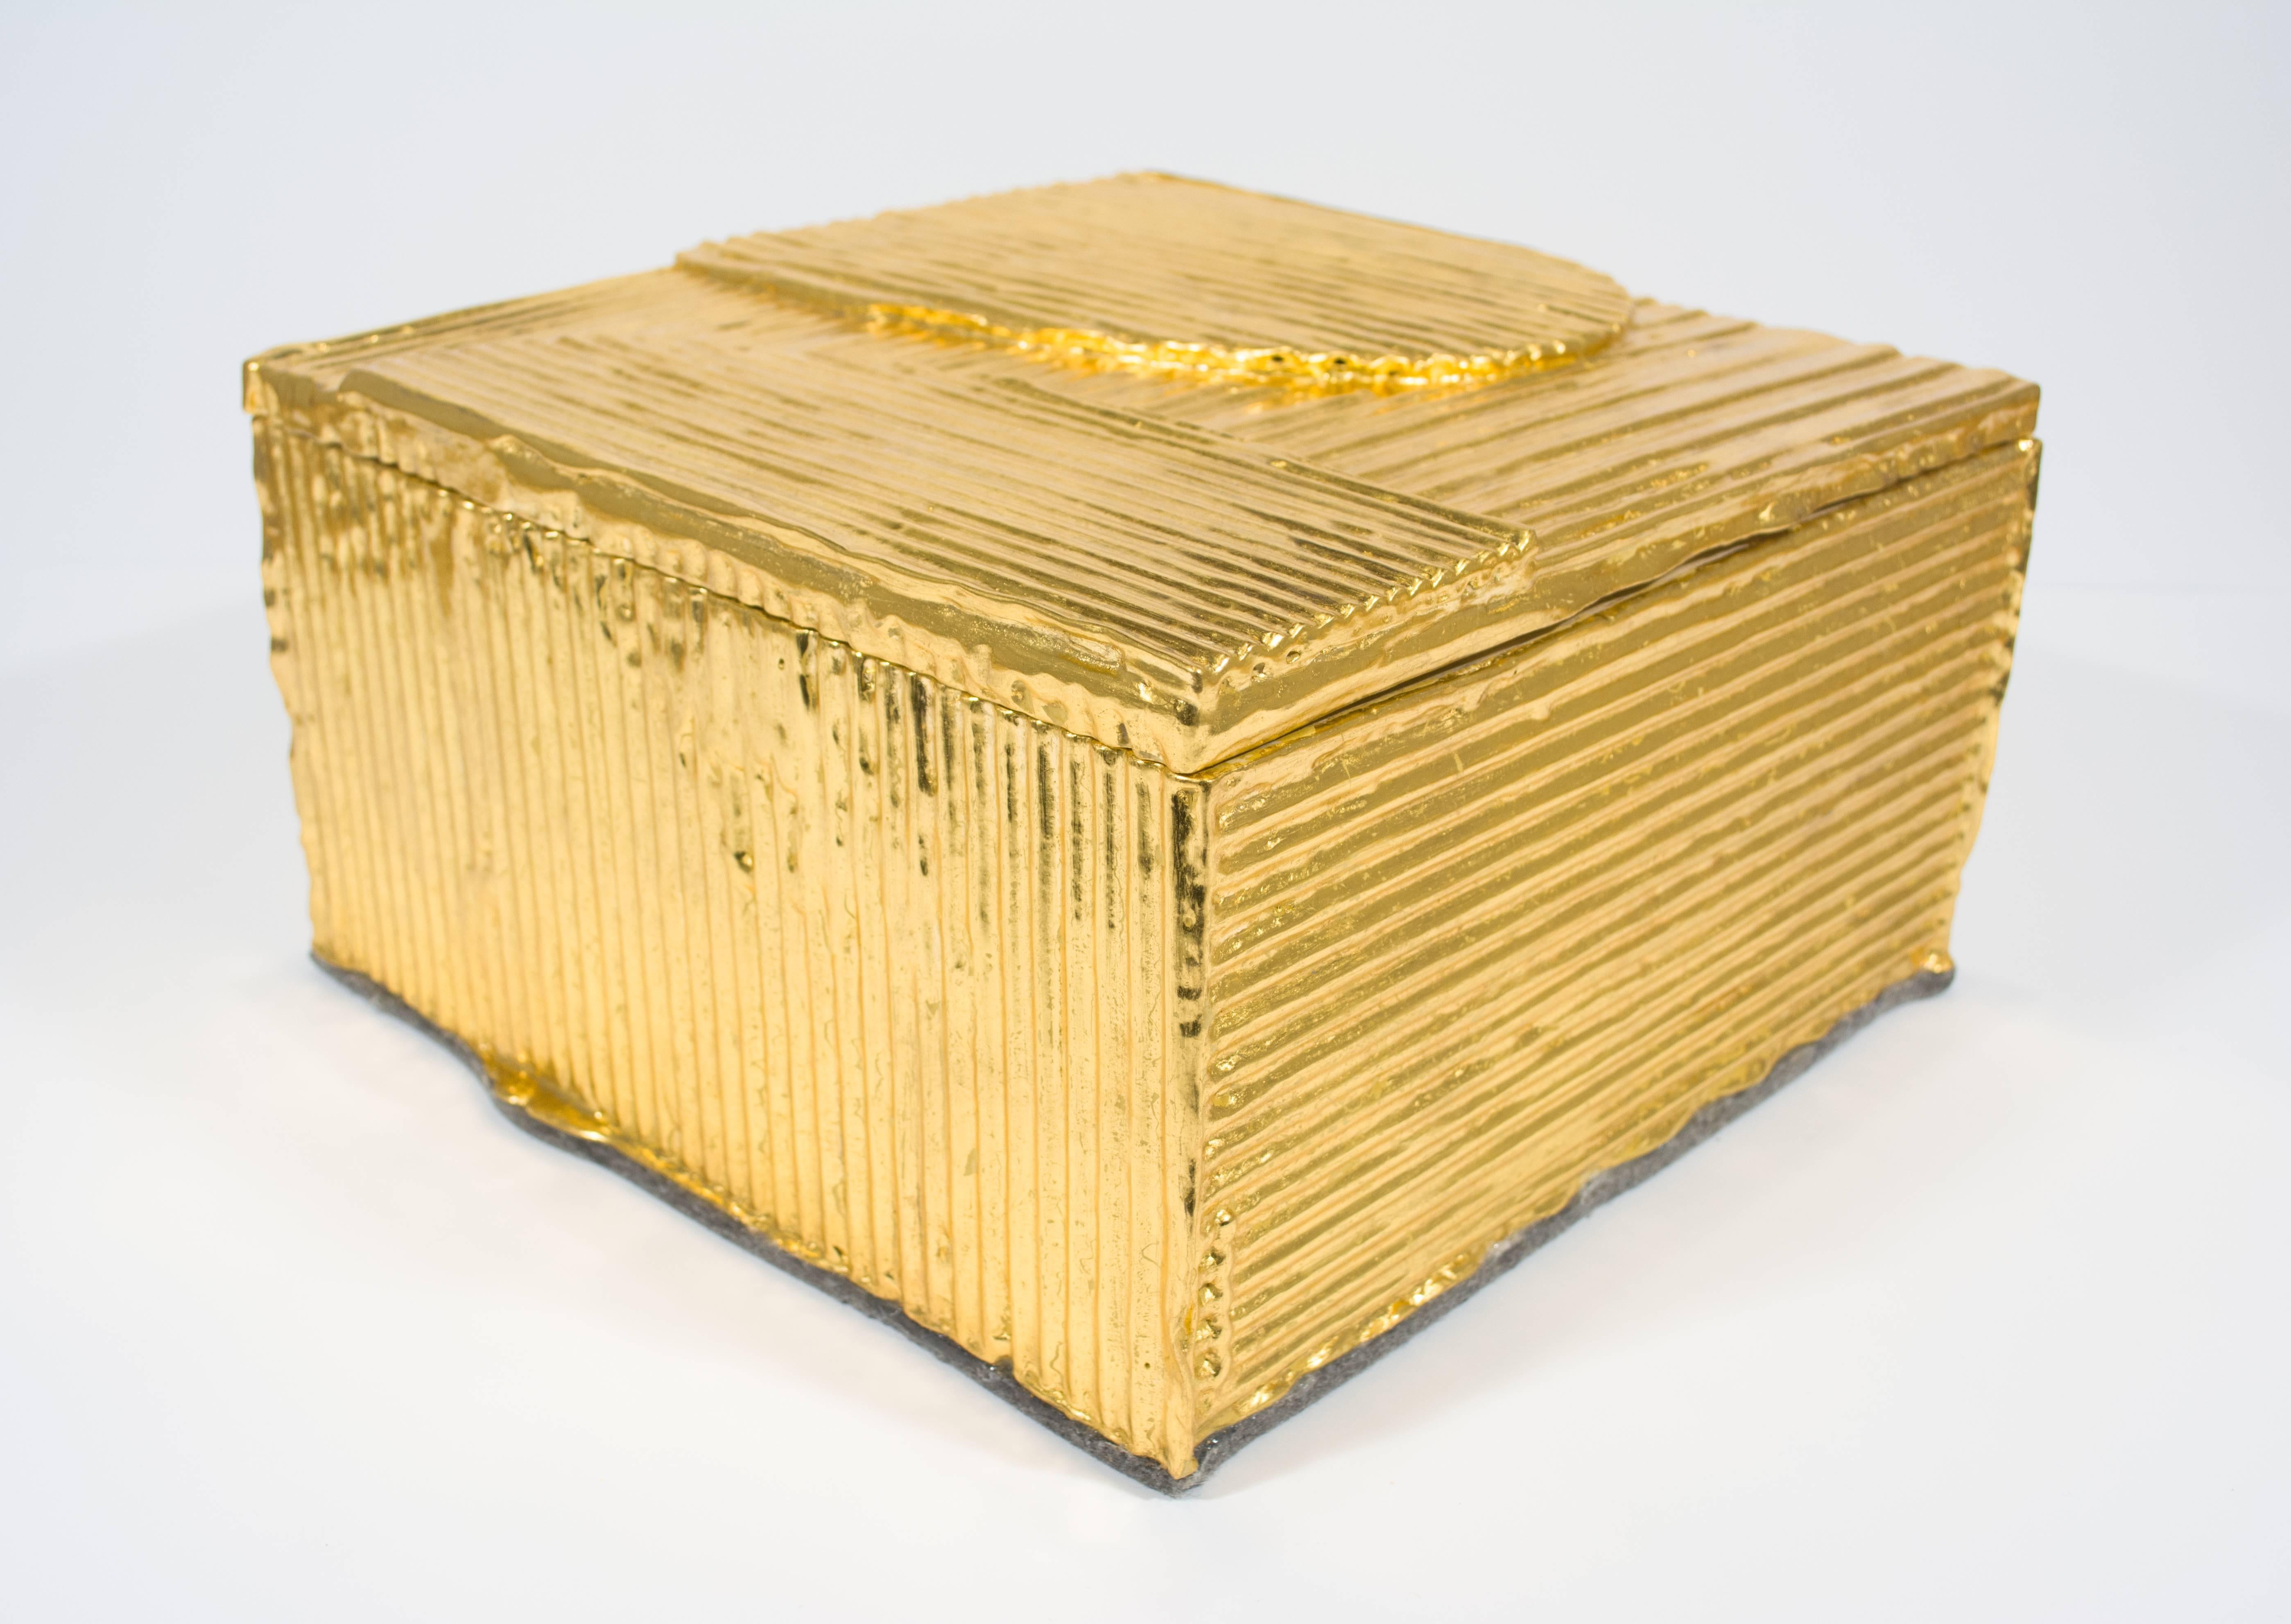 This functional box by Nancy Lorenz features a pawlonia box traditionally used for Japanese tea service. Attached to the outside are layers of cardboard, that Lorenz has gessoed and then covered in gold leaf. 

Nancy Lorenz earned a BFA in Painting